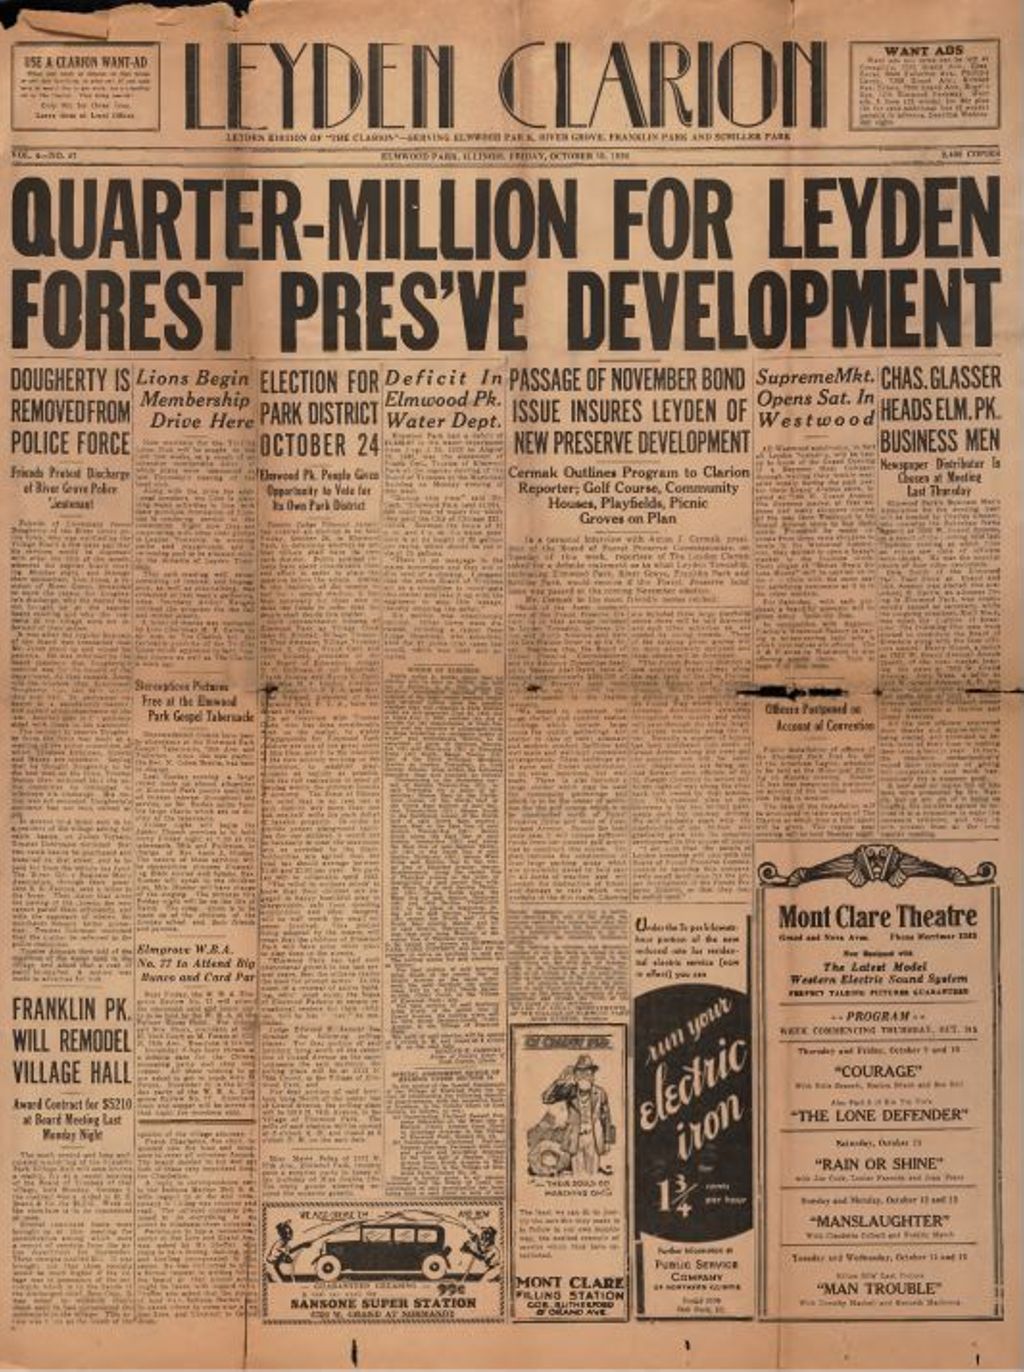 Miniature of Leyden Clarion, Bond Issue for Leyden Forest Preserve, 1930